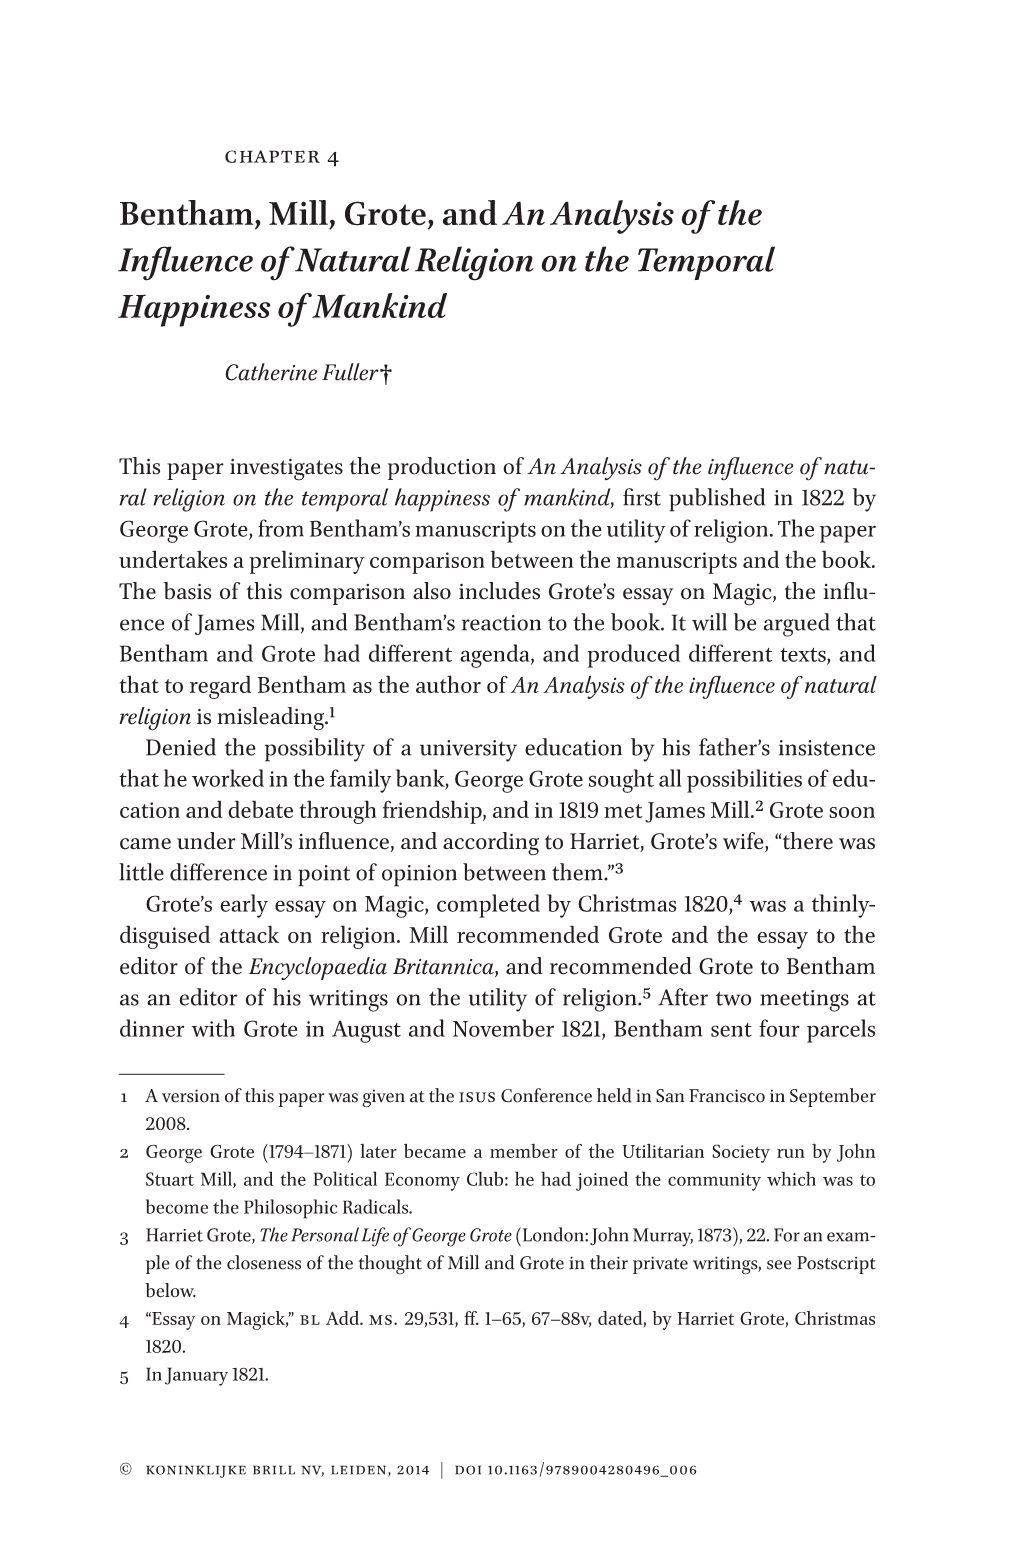 Bentham, Mill, Grote, and an Analysis of the Influence of Natural Religion on the Temporal Happiness of Mankind